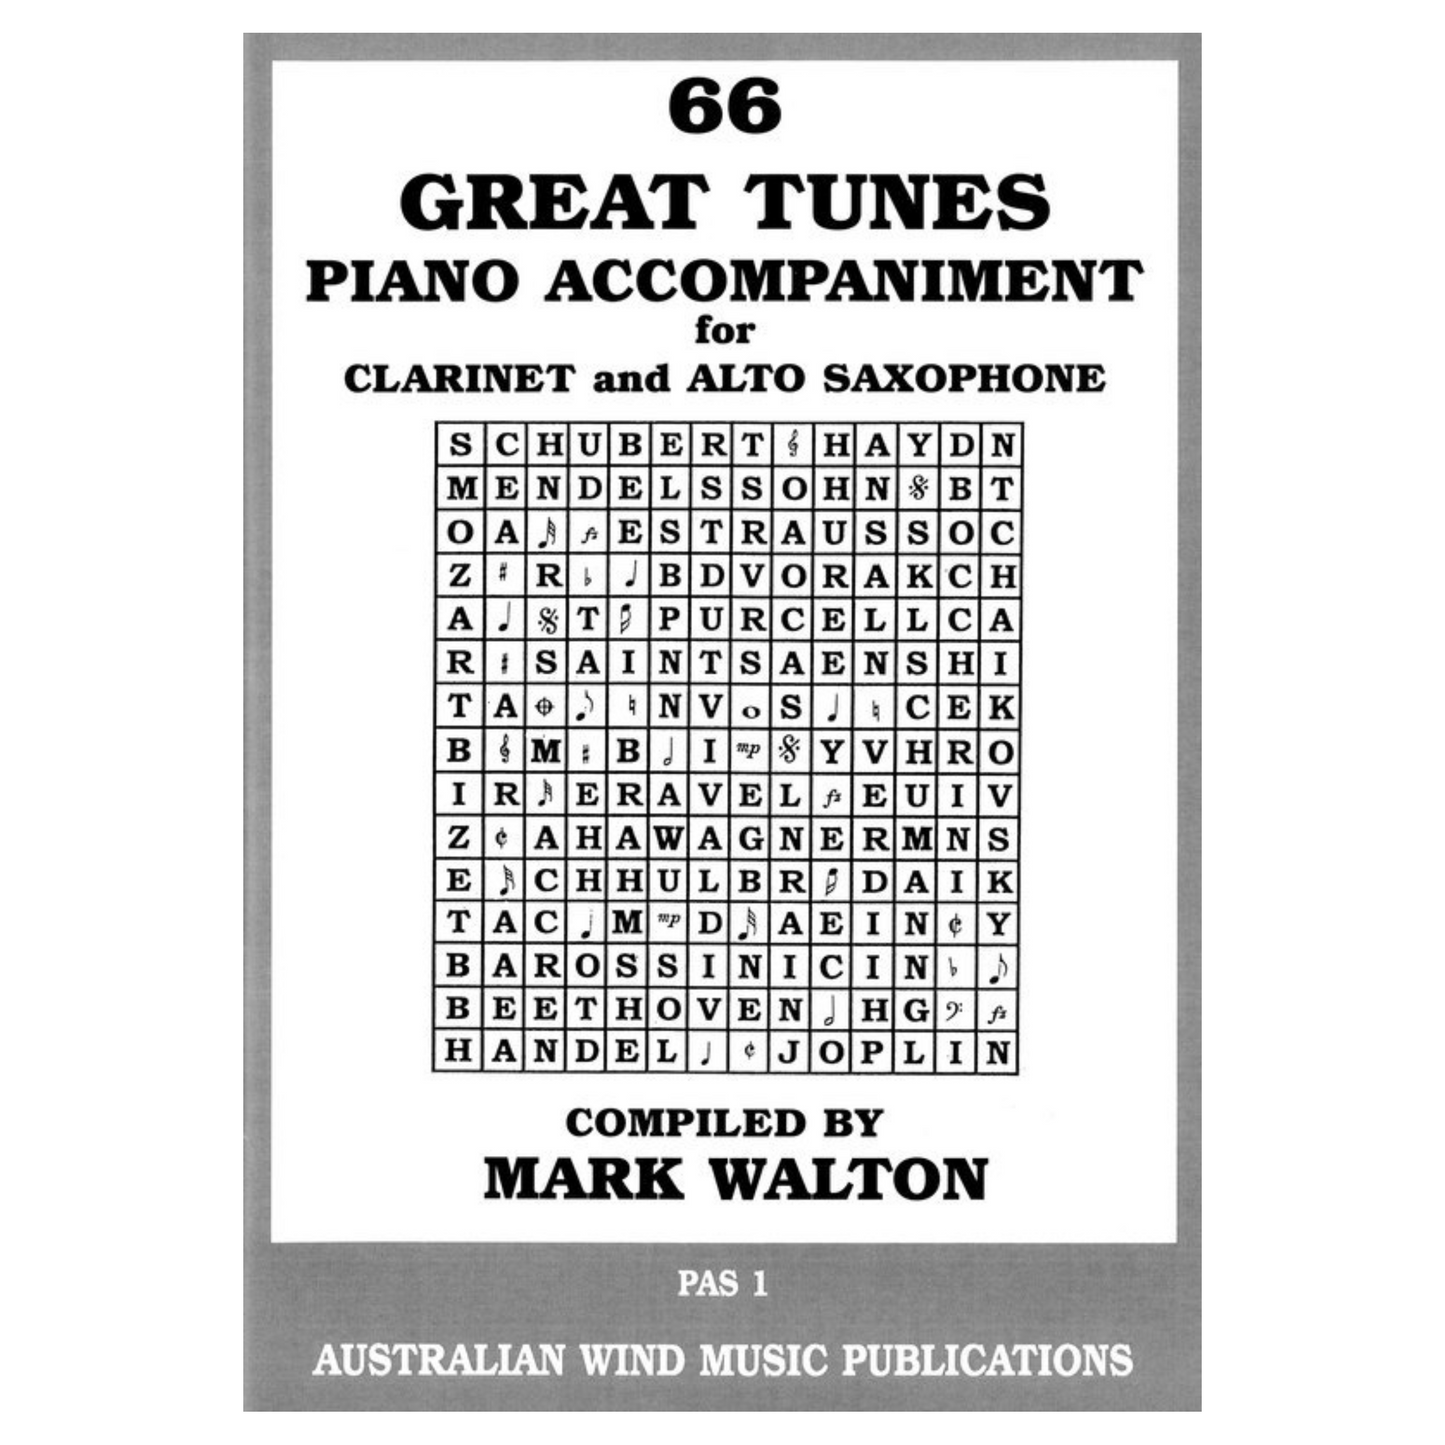 66 Great Tunes For Clarinet and Alto Saxophone - Piano Accompaniment Book